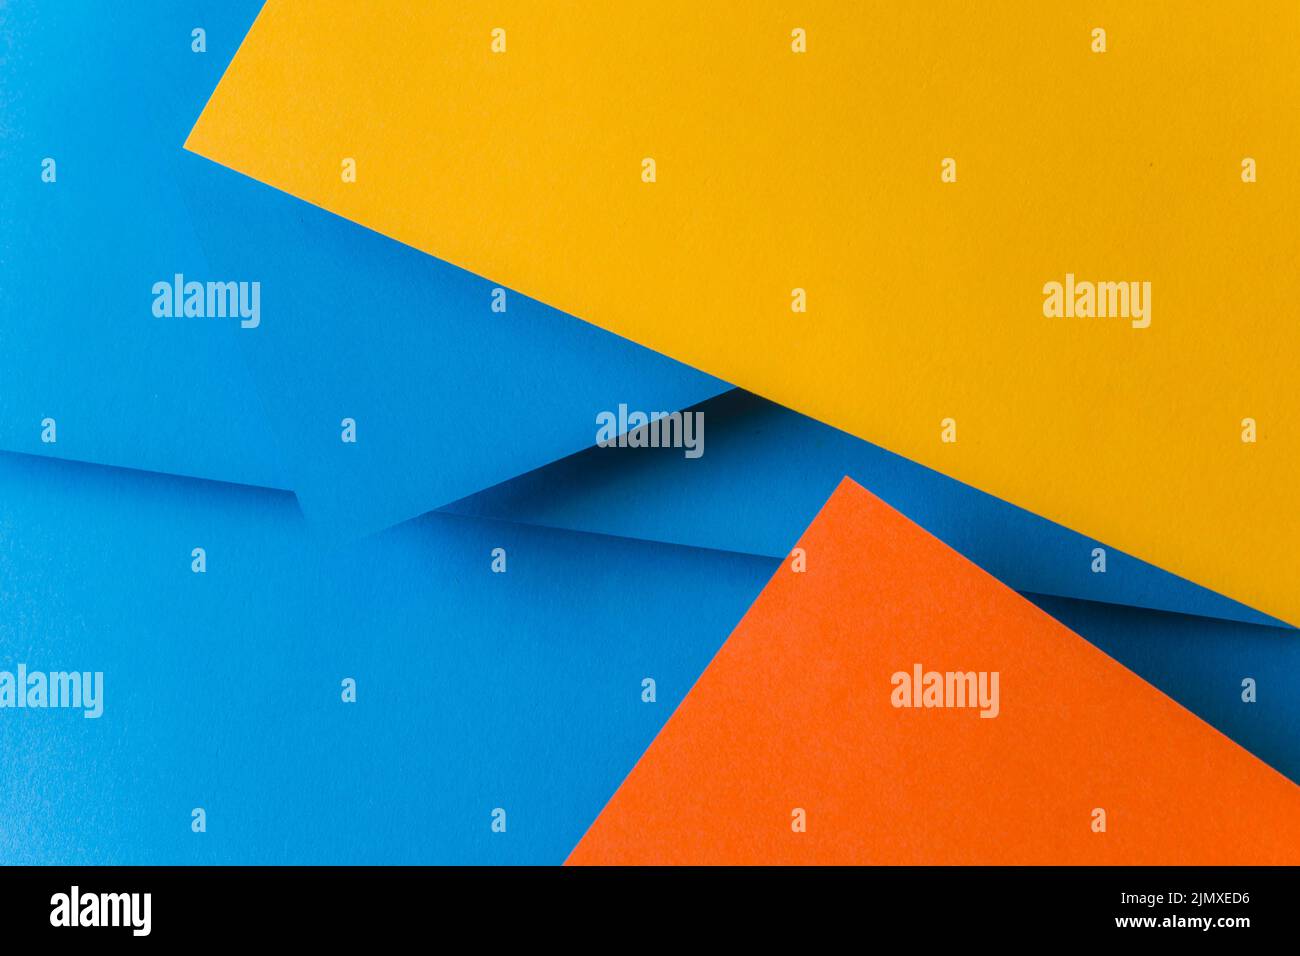 Blue orange yellow color papers background Stock Photo